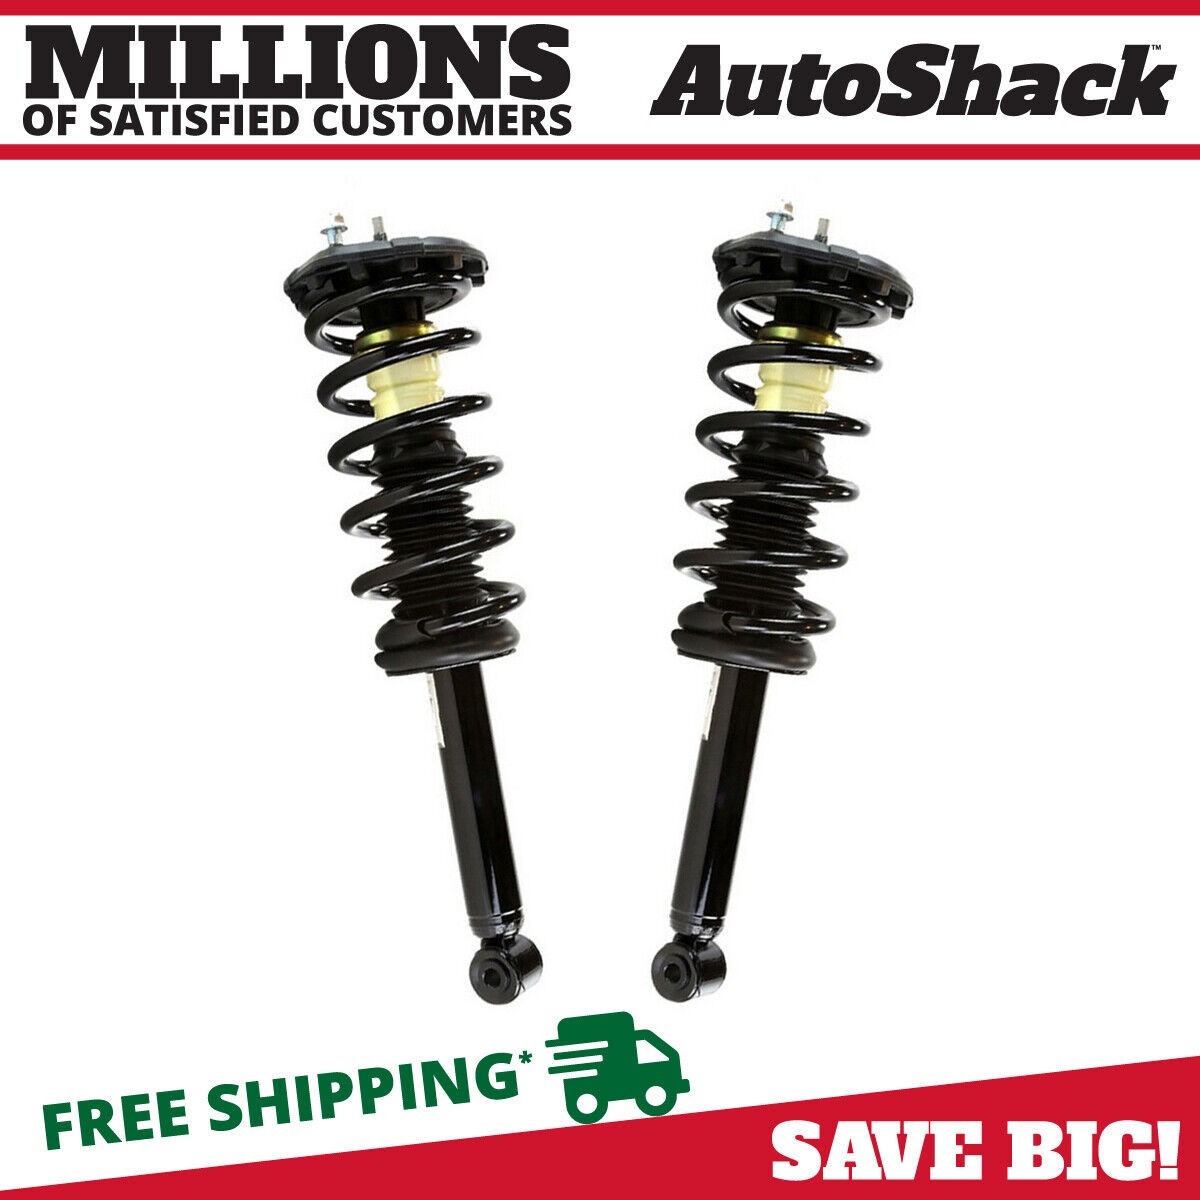 Rear Complete Struts Coil Springs Pair 2 for INFINITI I35 I30 Nissan Maxima 3.5L